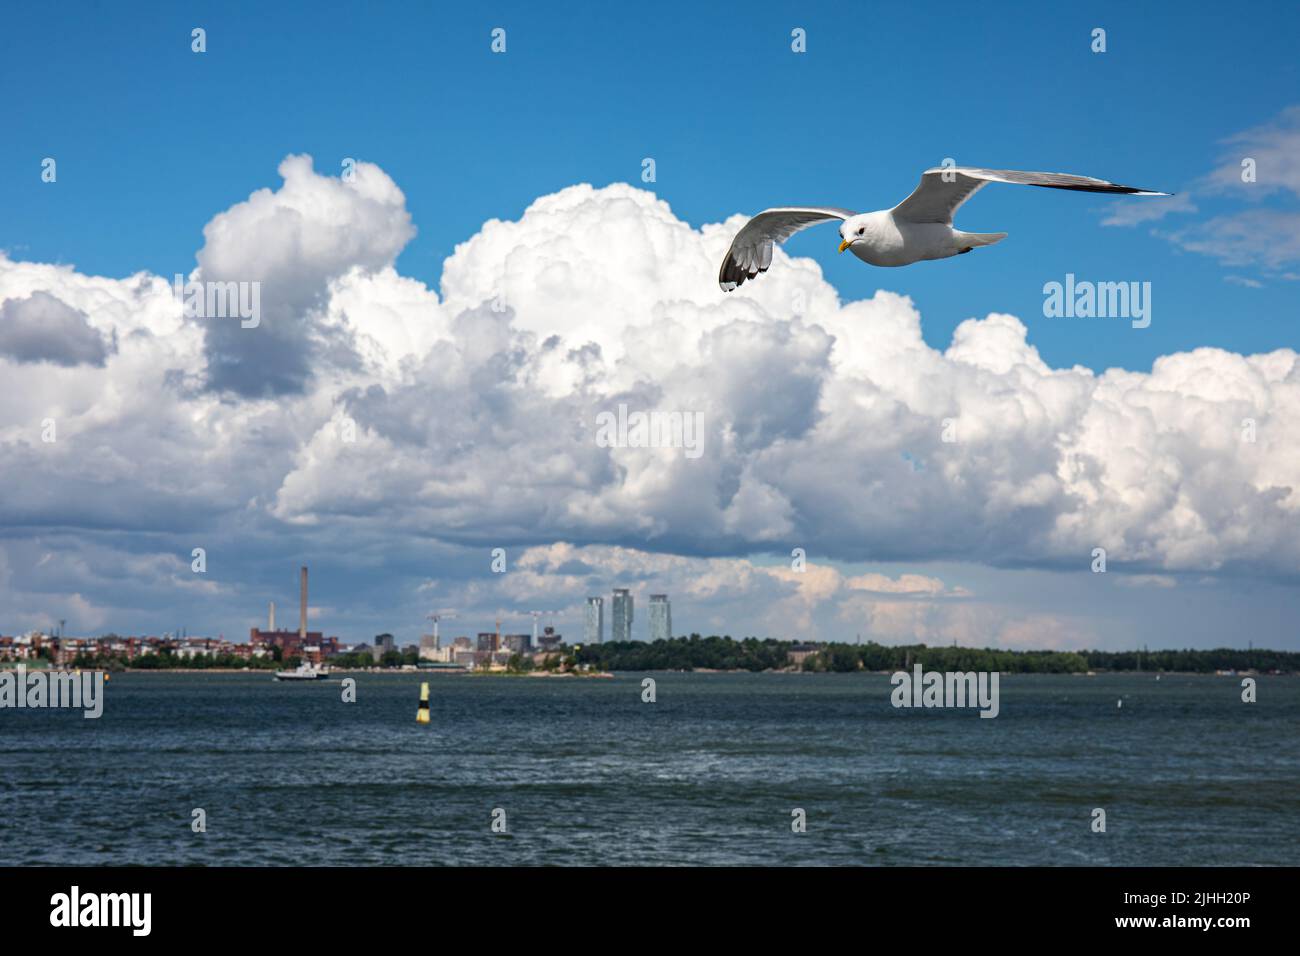 Common gull or Larus canus gliding in the air with Helsinki skyline in the background. Helsinki, Finland. Stock Photo